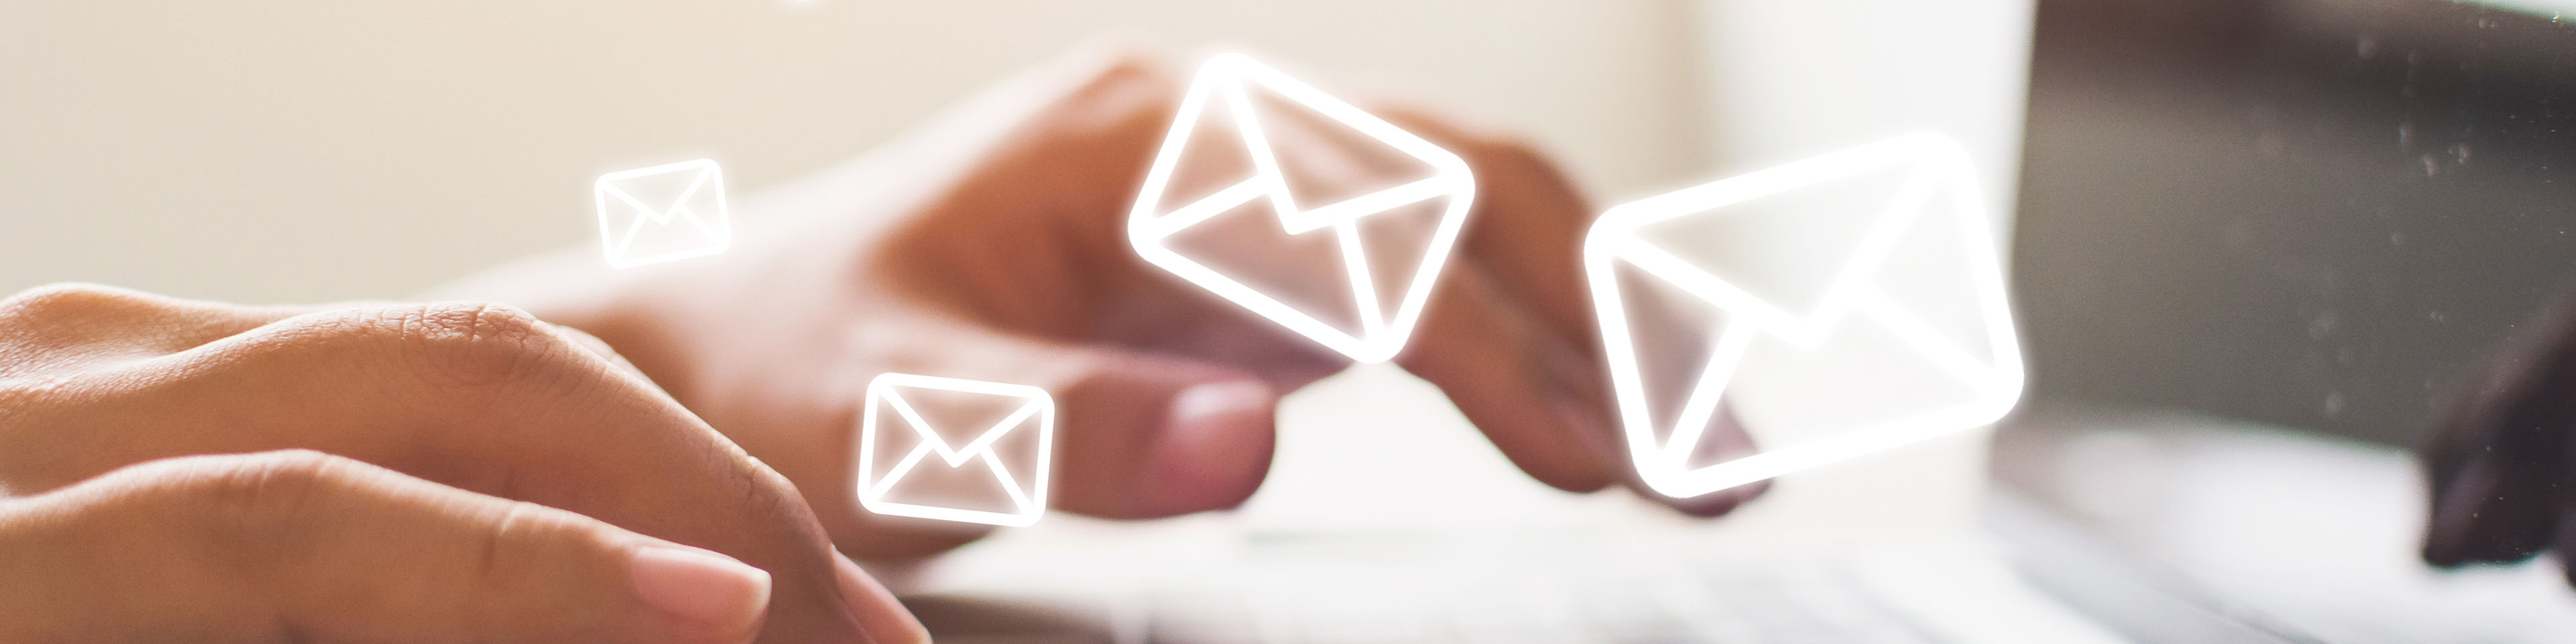 I struggle to manage my emails: what can I do? 